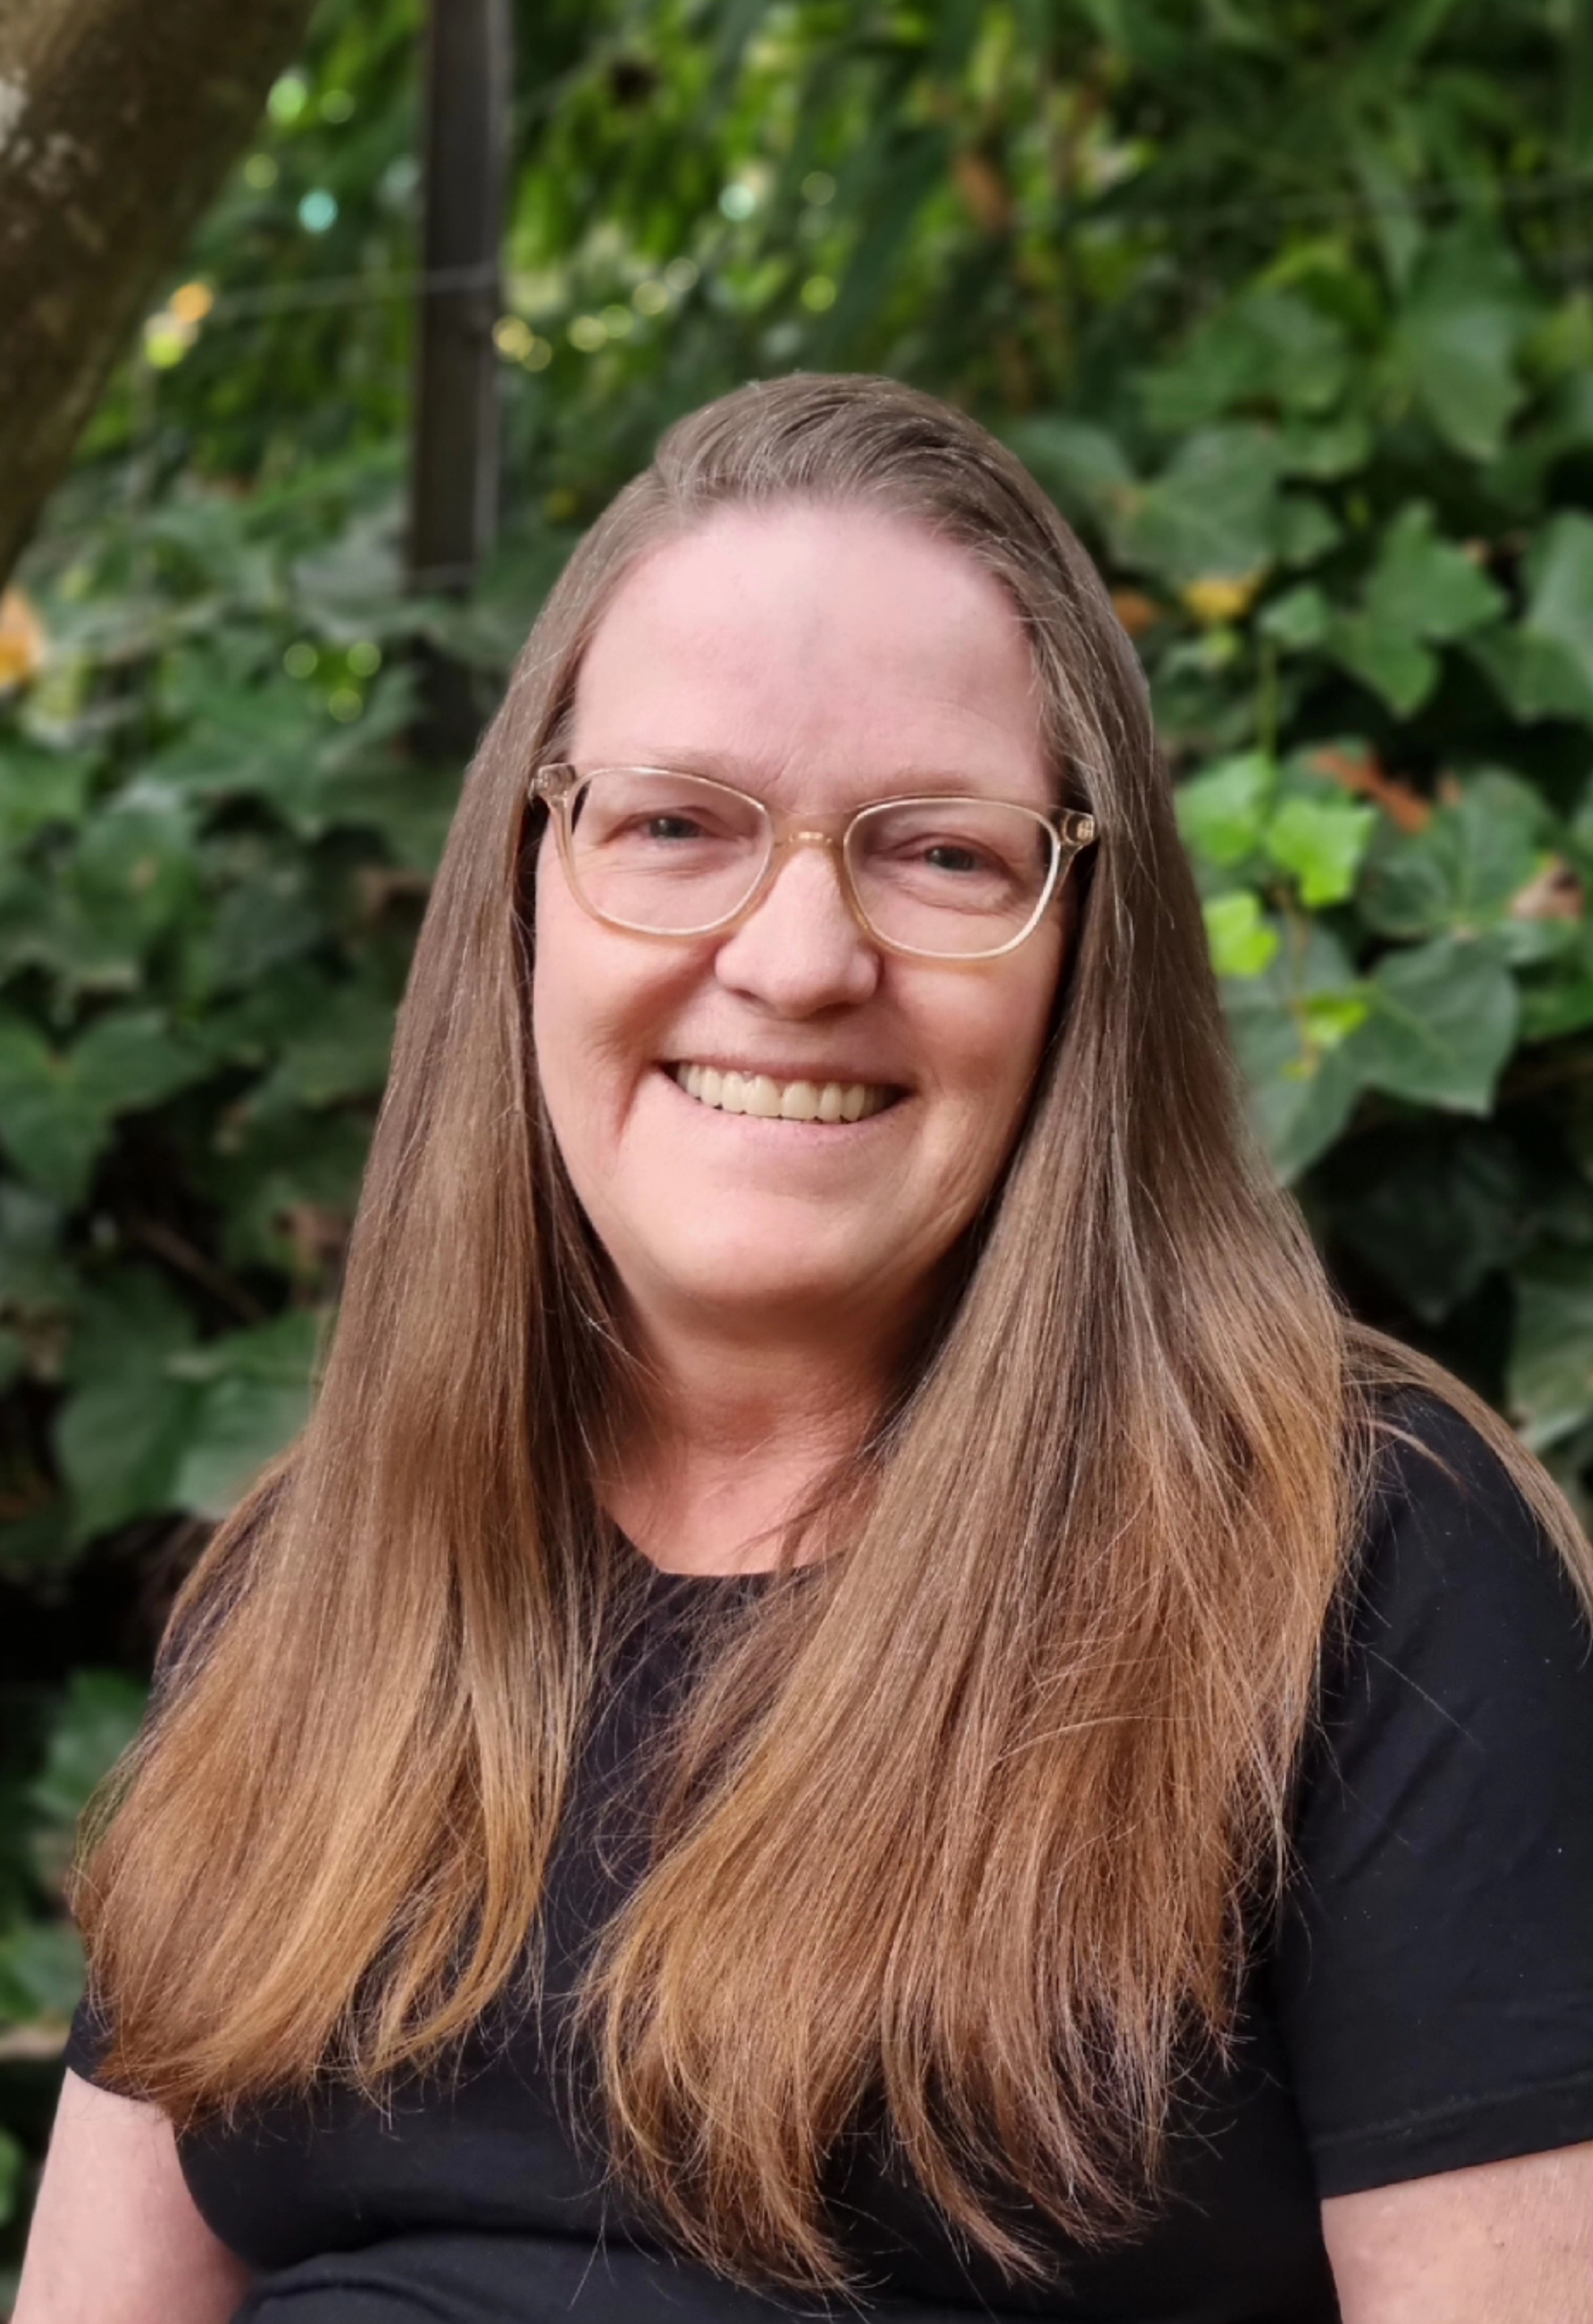 Lynda Wheelock in a black tshirt, wearing glasses and standing in front of greenery.